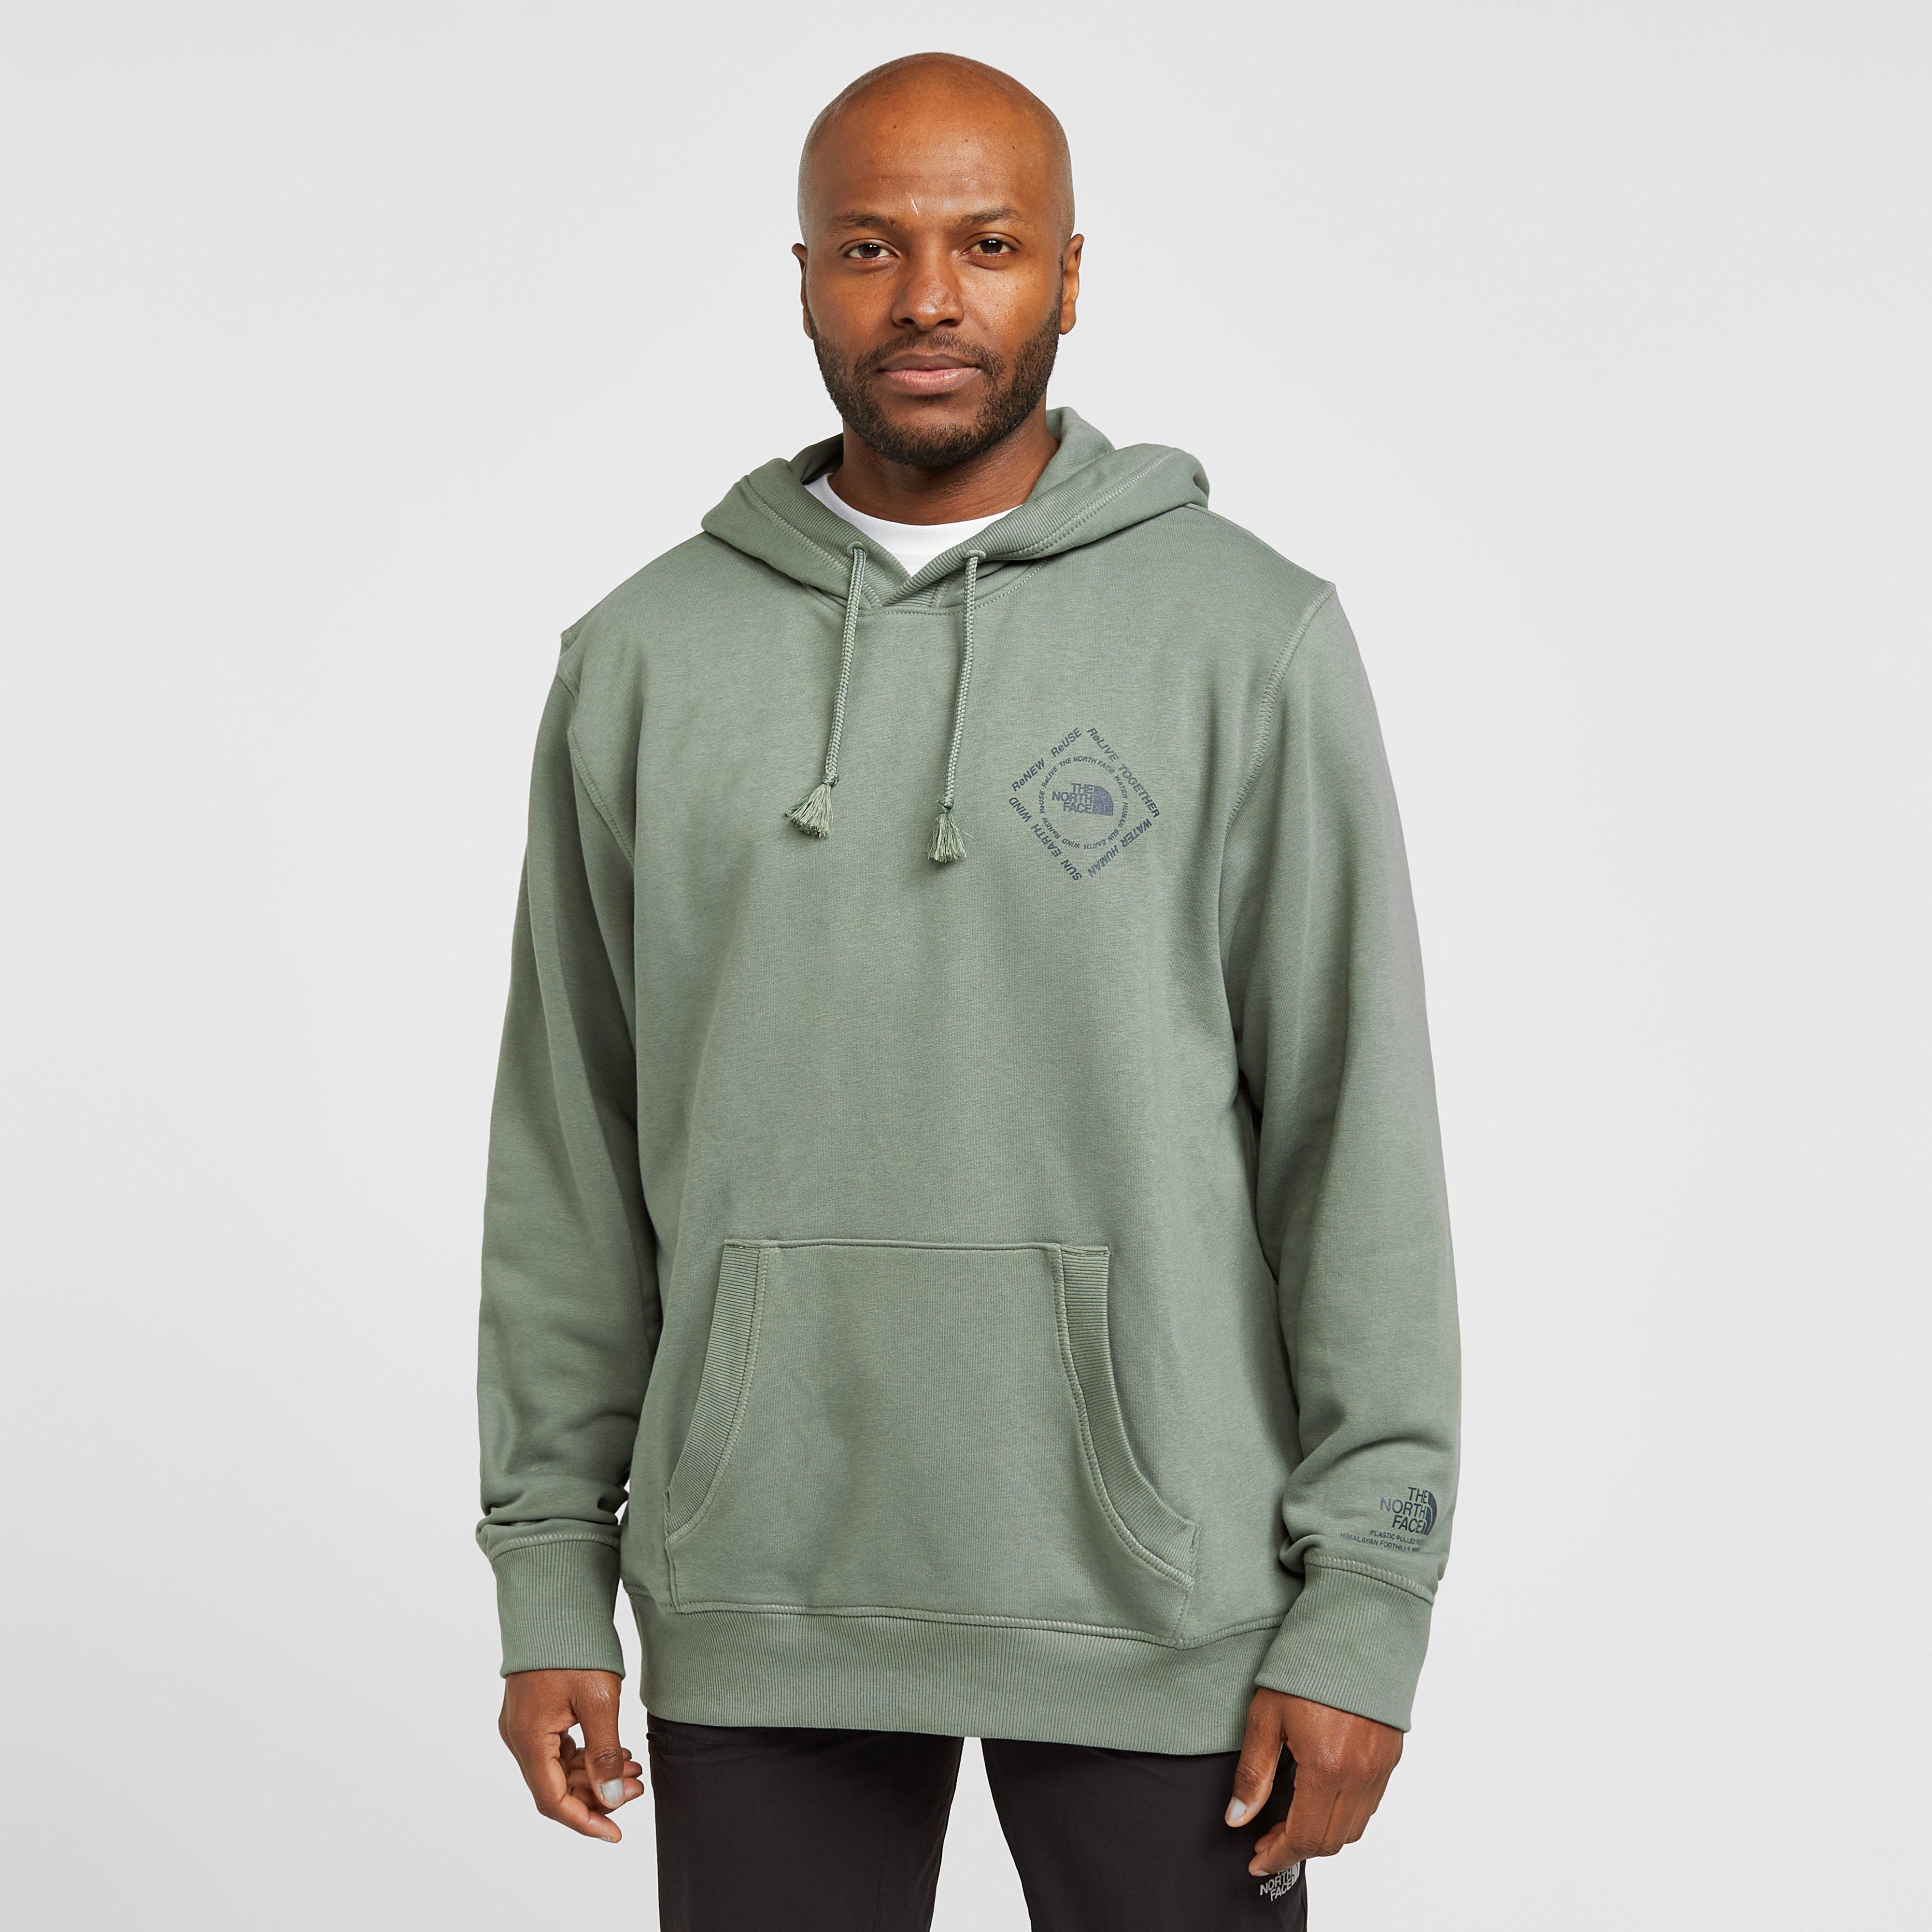 Image of The North Face Mens Himalayan Bottle Hoodie Green - Grn/Grn, GRN/GRN